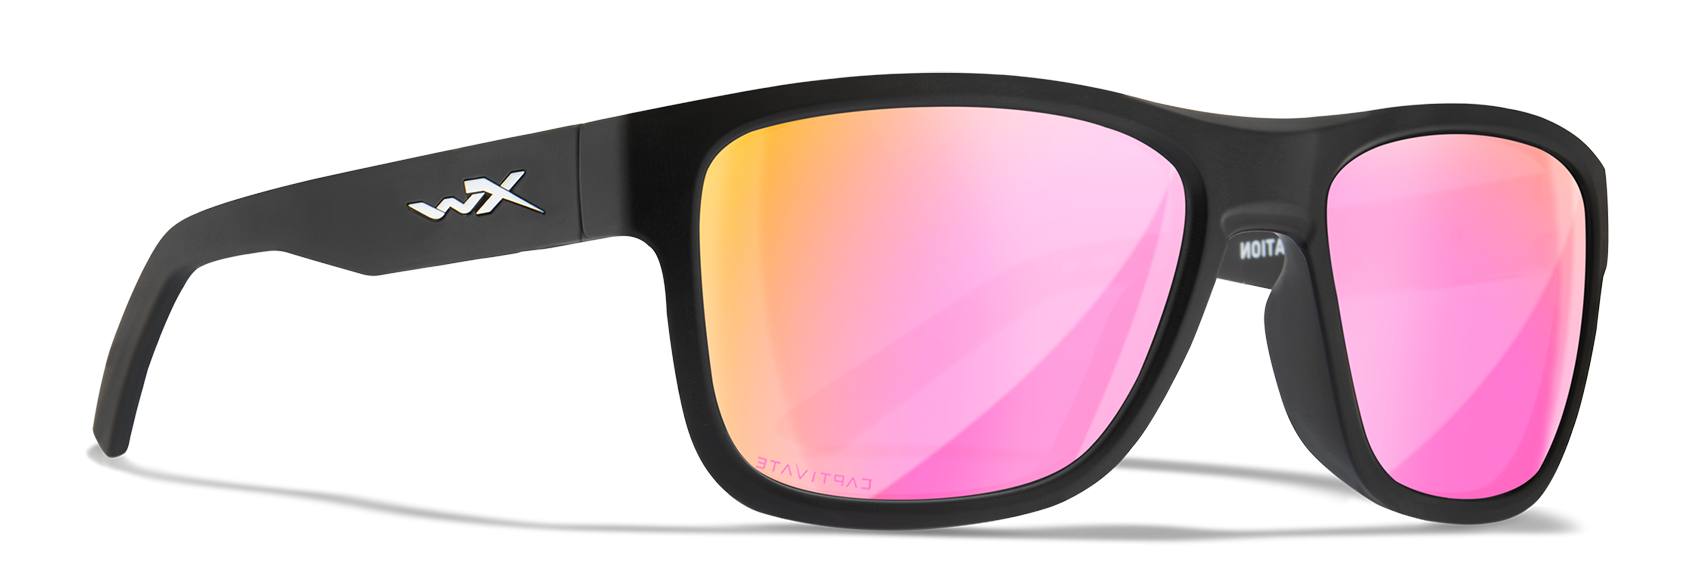 Wiley X WX Ovation Rose Gold Mirror Lens Polycarbonate Sunglasses